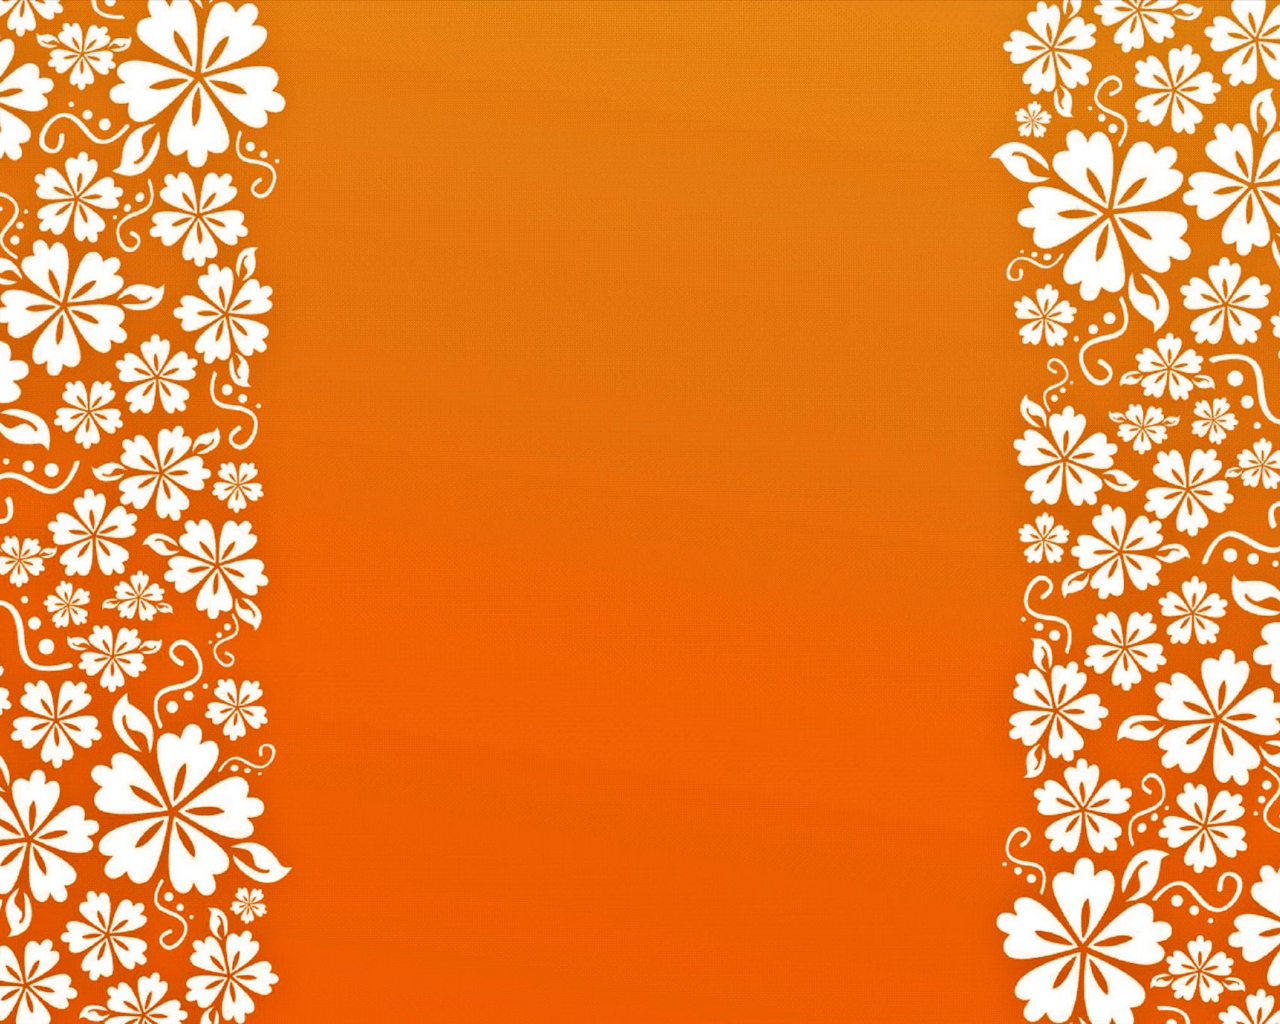 Border And Orange Background In The Design For Ppt